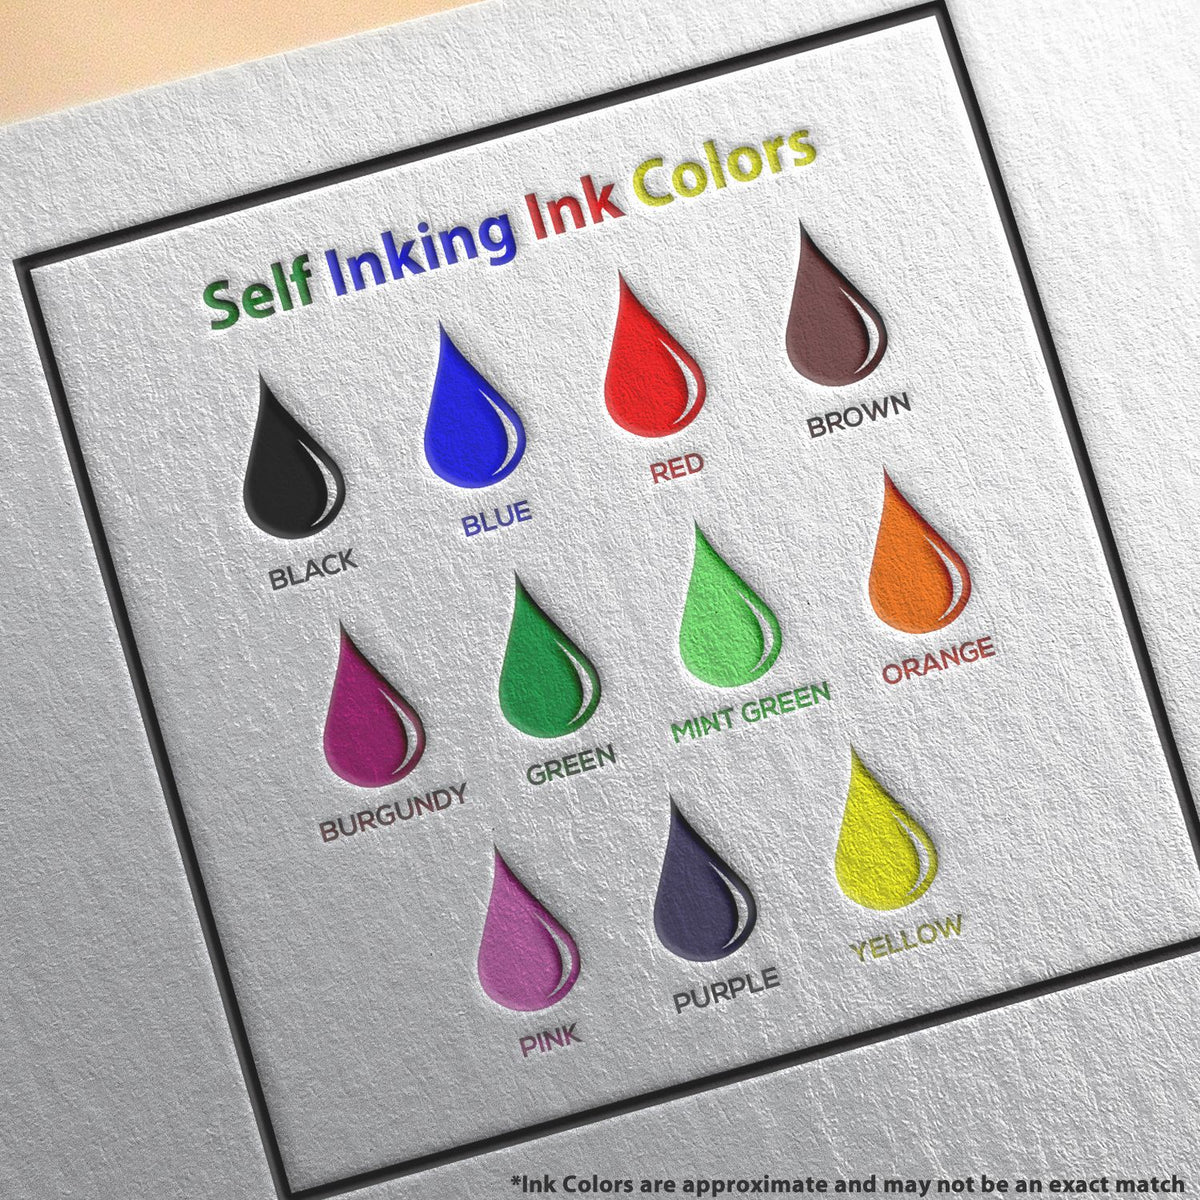 A picture showing the different ink colors or hues available for the Self-Inking Kentucky Landscape Architect Stamp product.